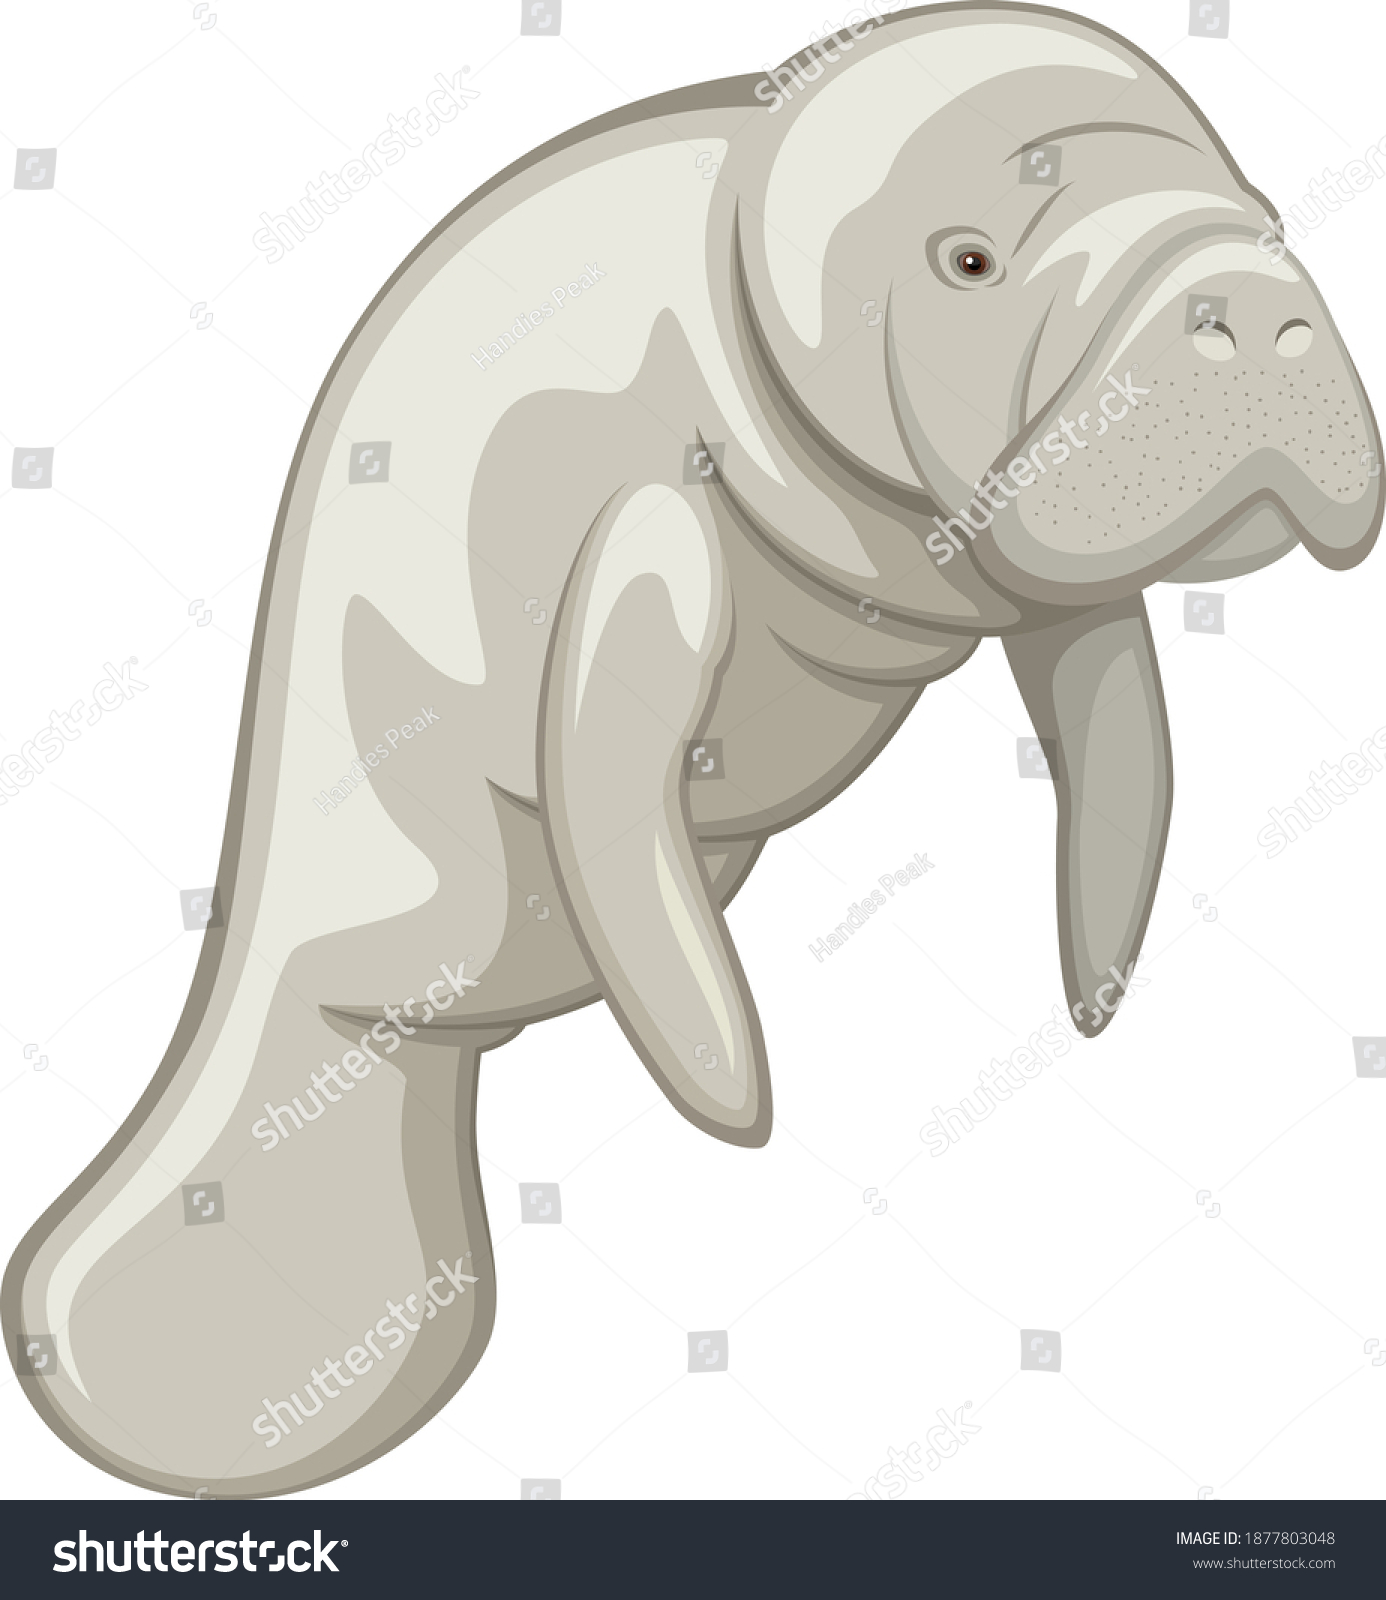 SVG of Vector illustration of a manatee against a white background. svg